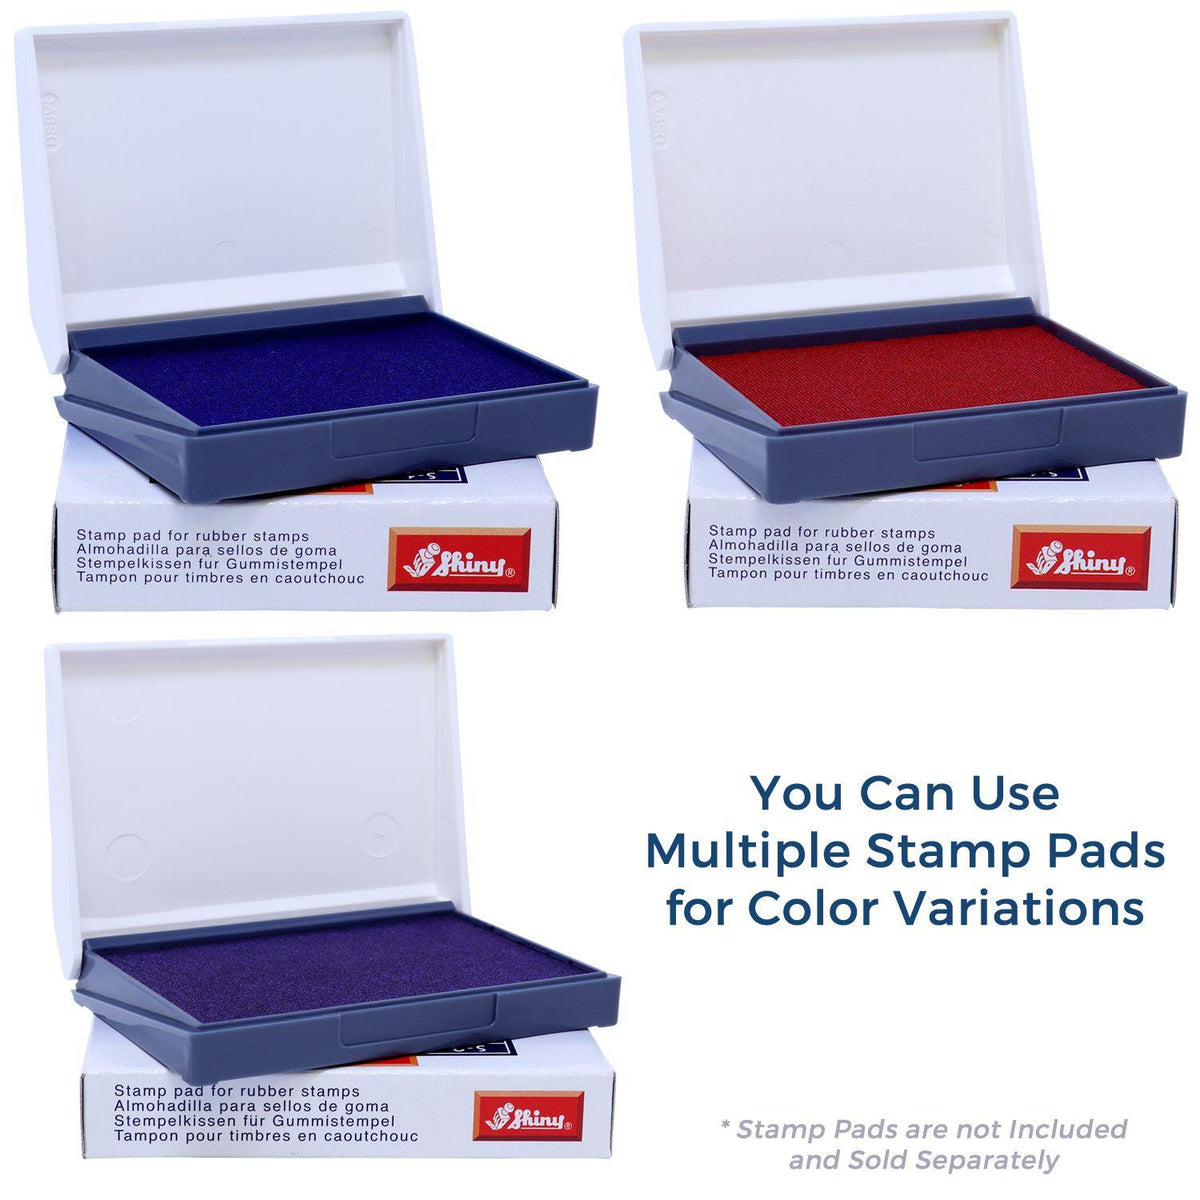 Stamp Pads for Large Kaiser Rubber Stamp Available